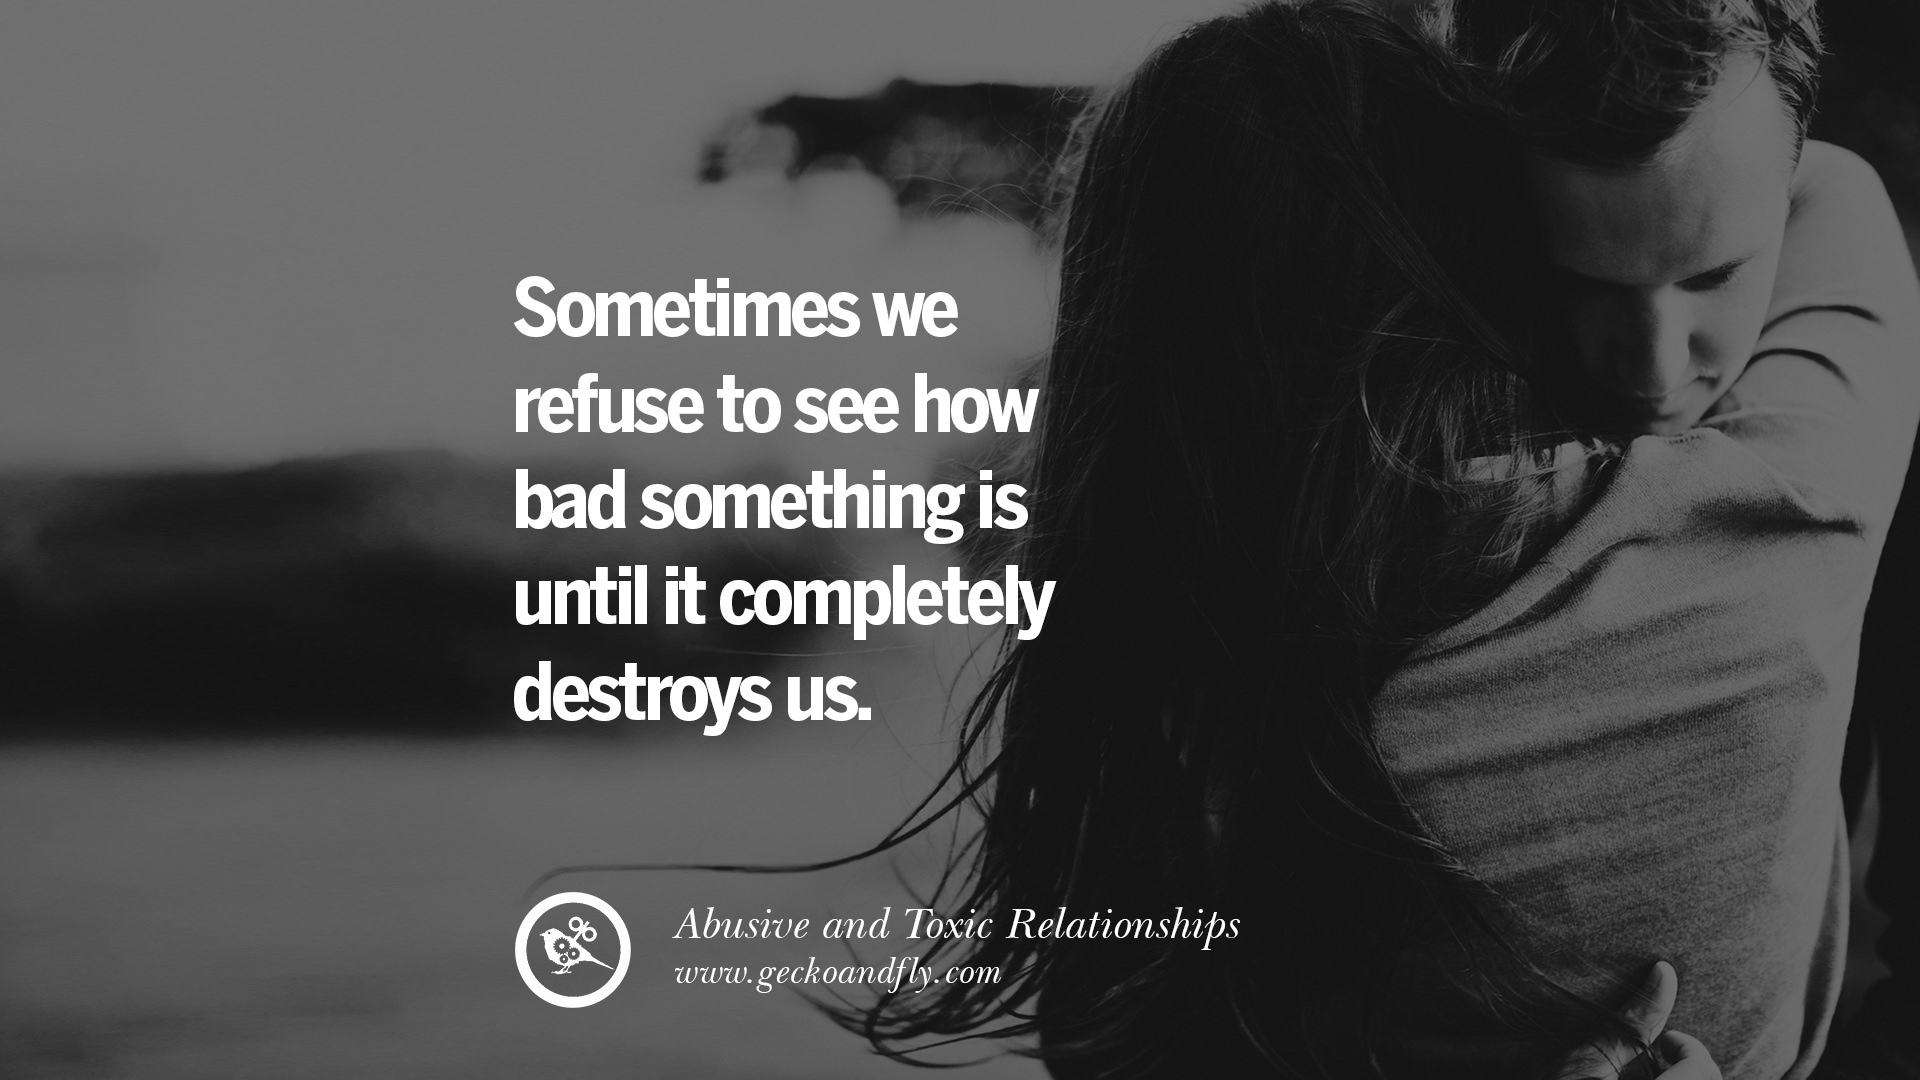 Sometimes we refuse to see how bad something is until it pletely destroys us